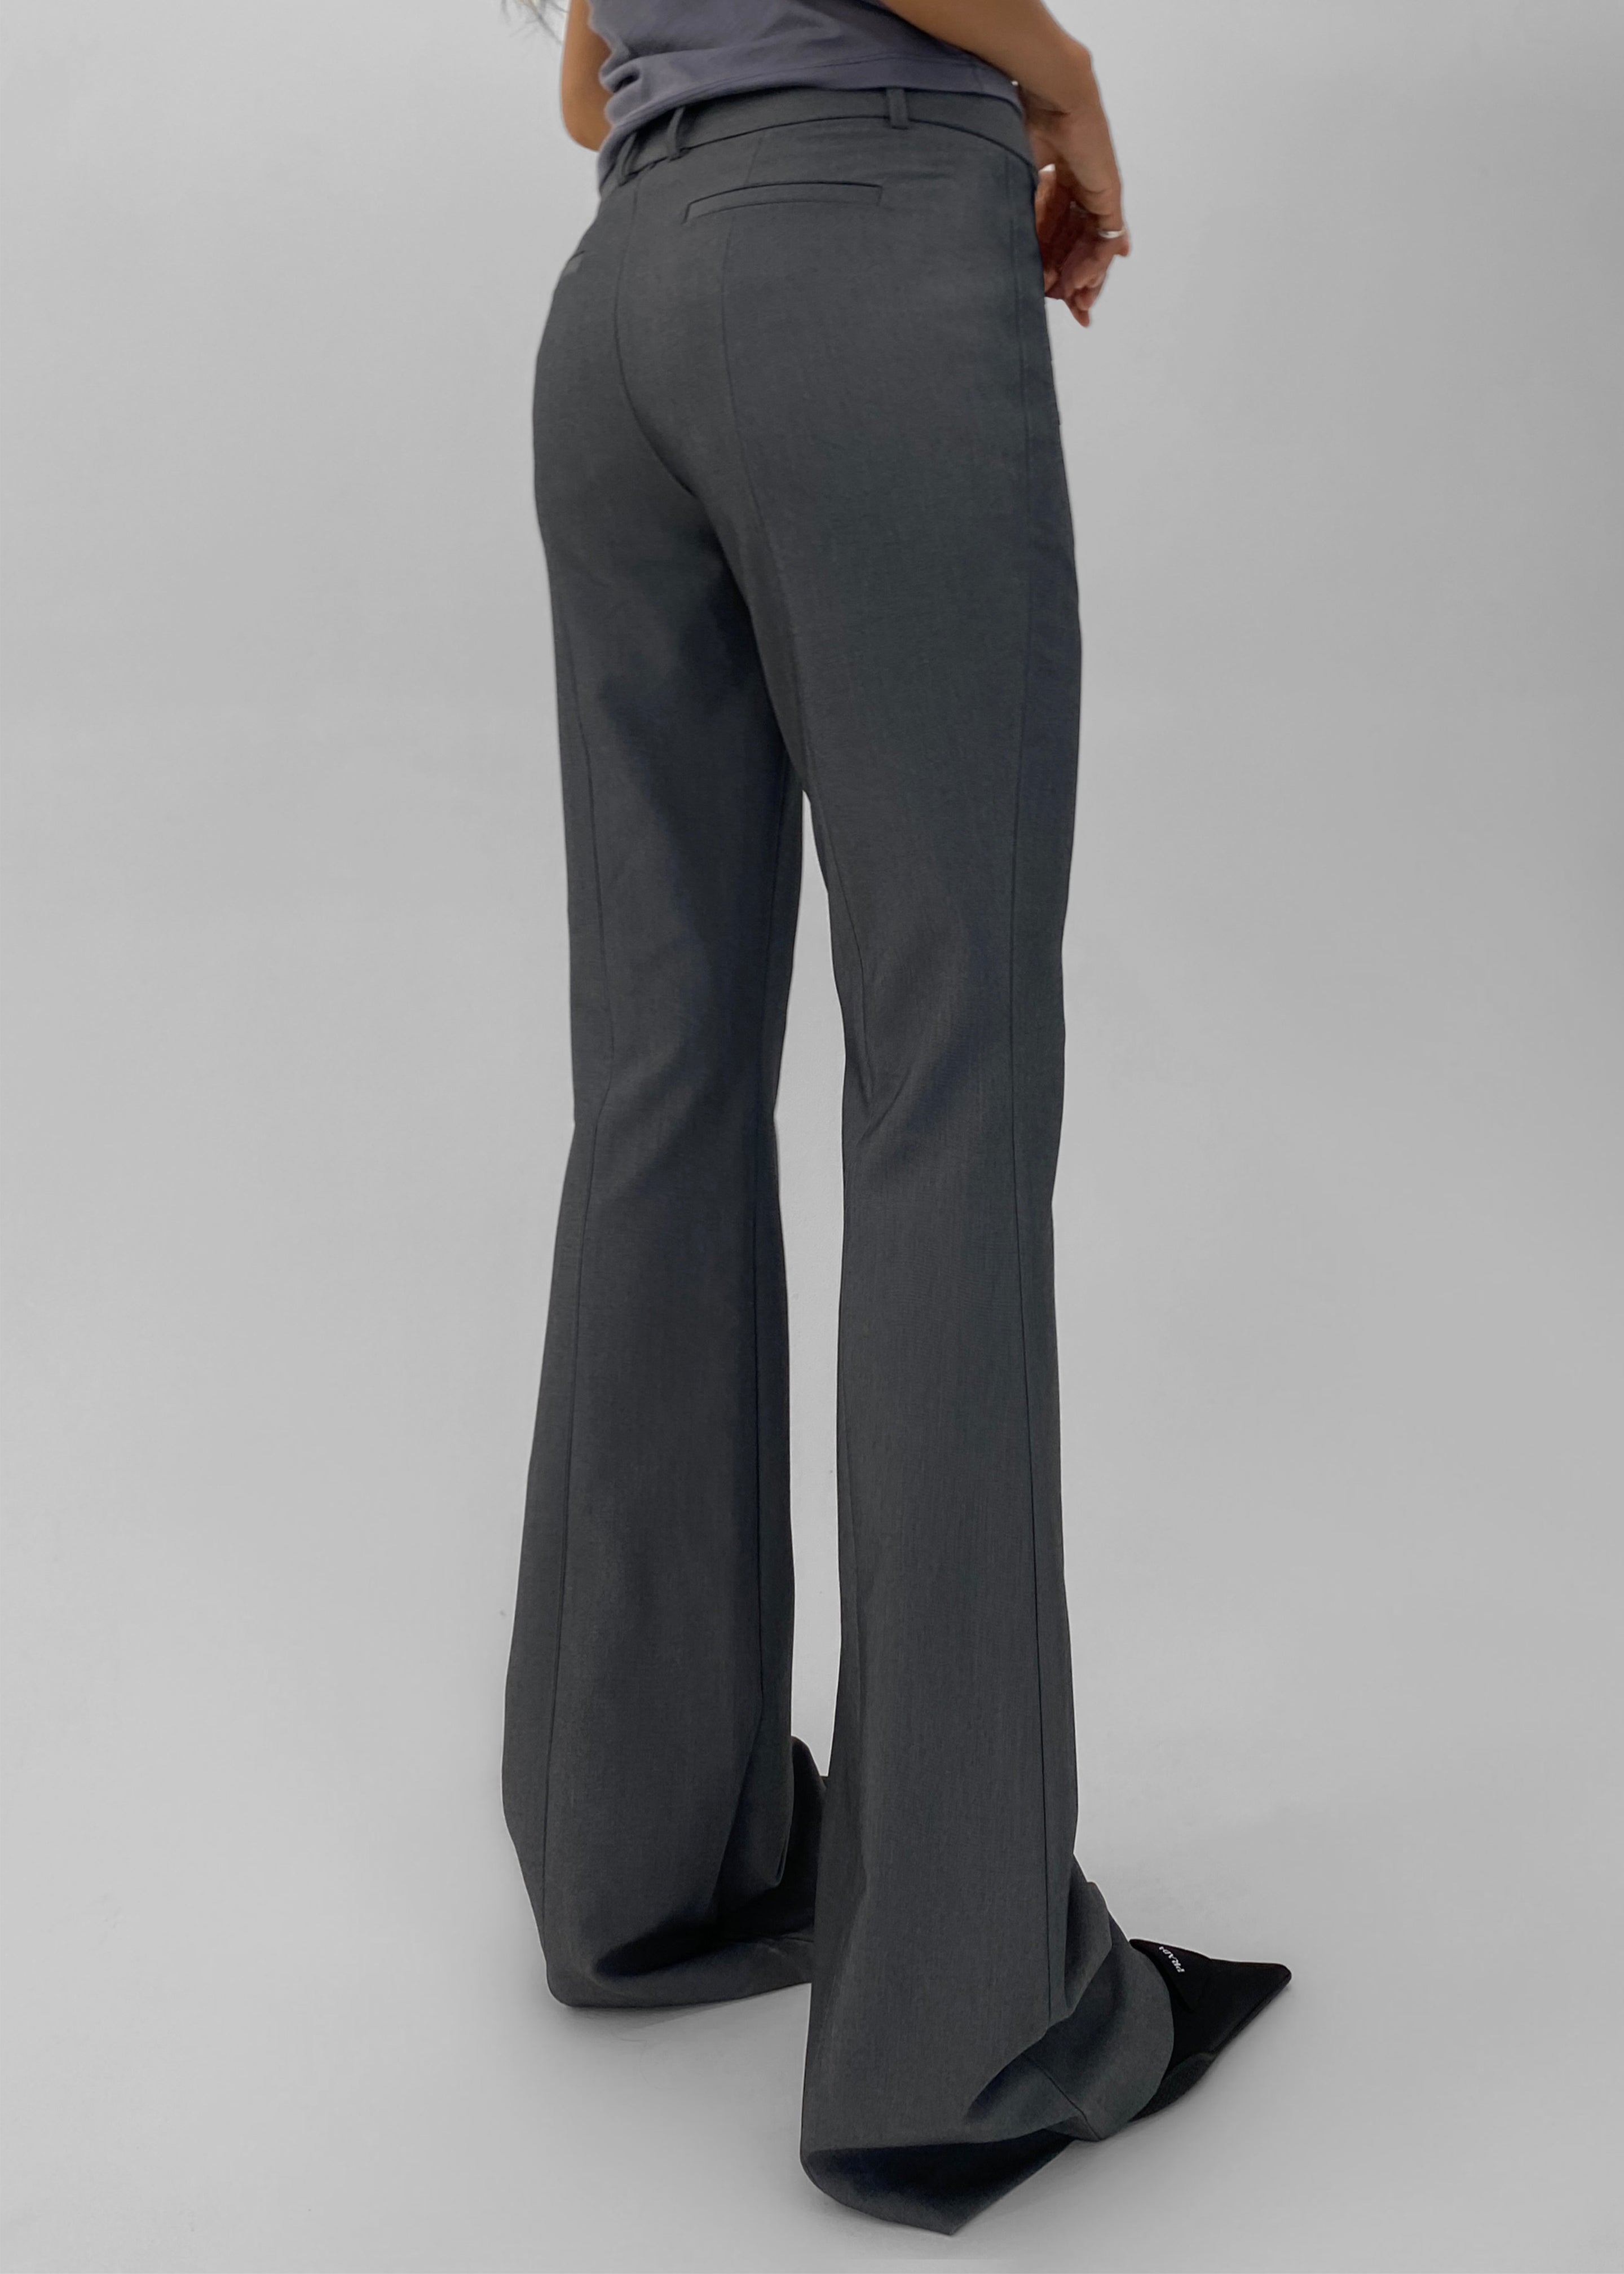 Dare to Flare Pants in Charcoal – Timber Brooke Boutique